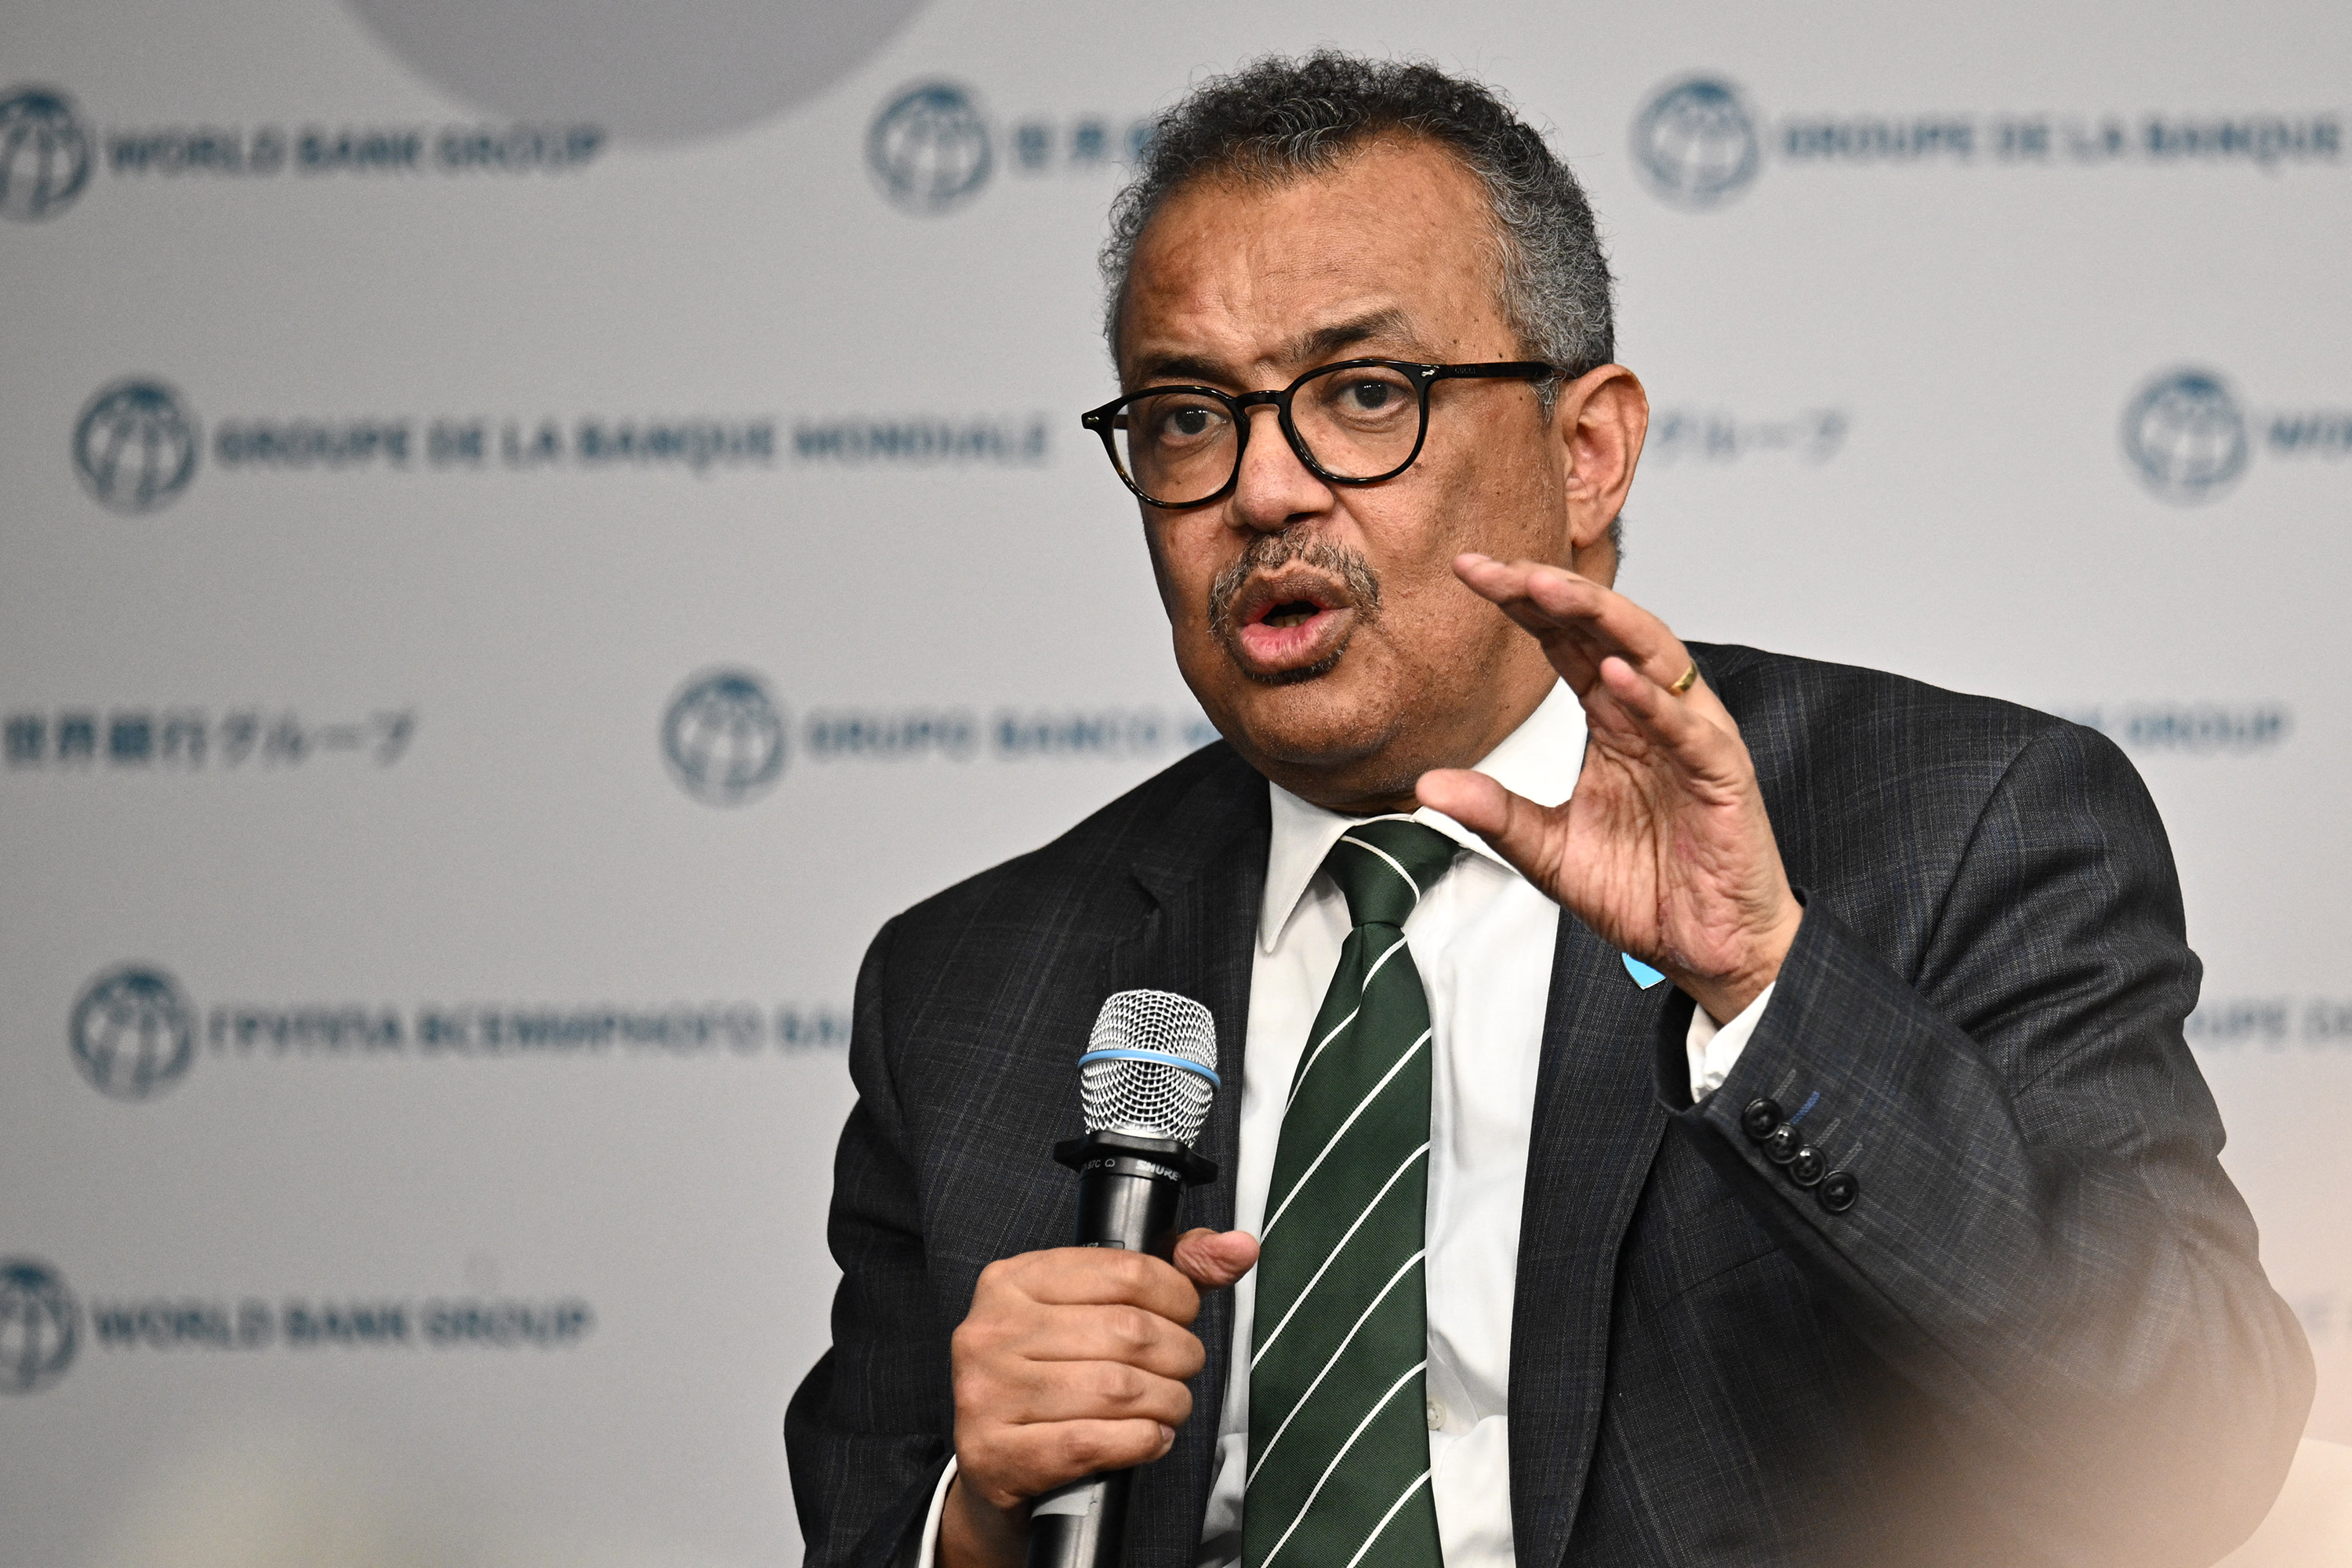 WHO Director-General Tedros Adhanom Ghebreyesus speaks at the World Bank headquarters in Washington, DC, in April.